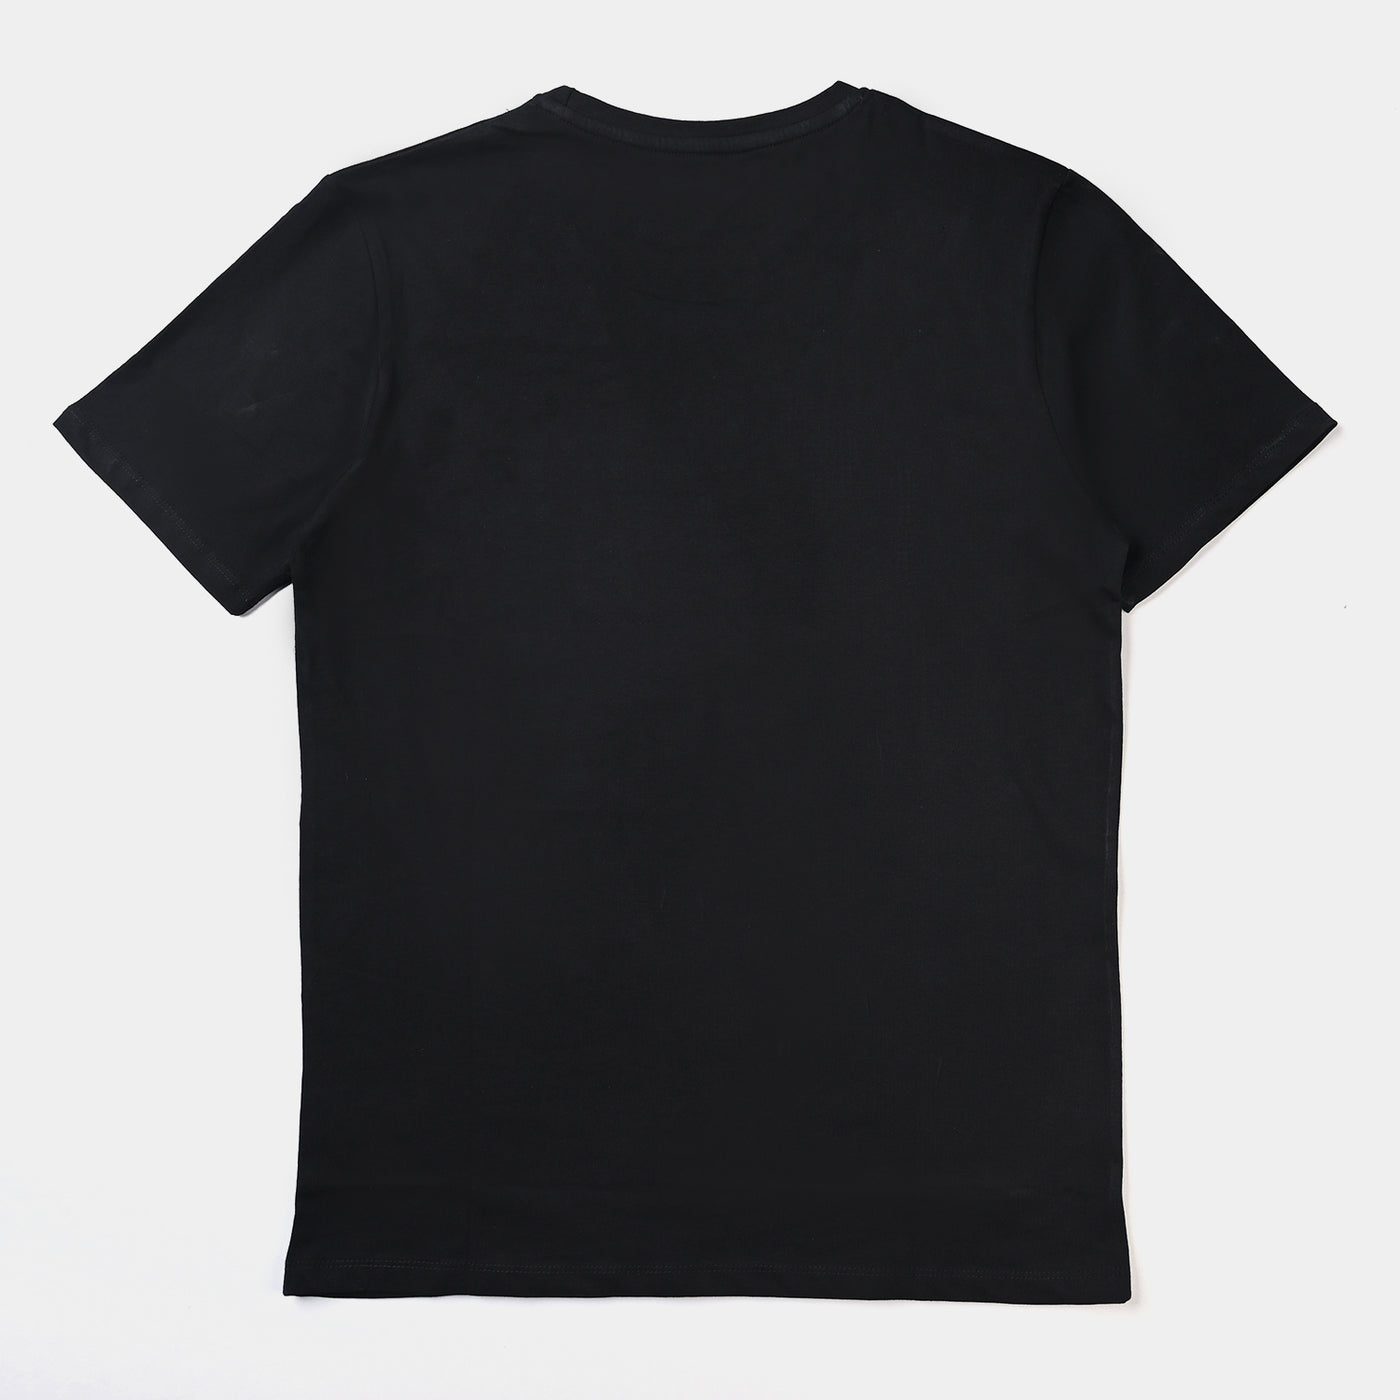 Teens Boys Cotton Jersey Tees H/S Character-BLACK